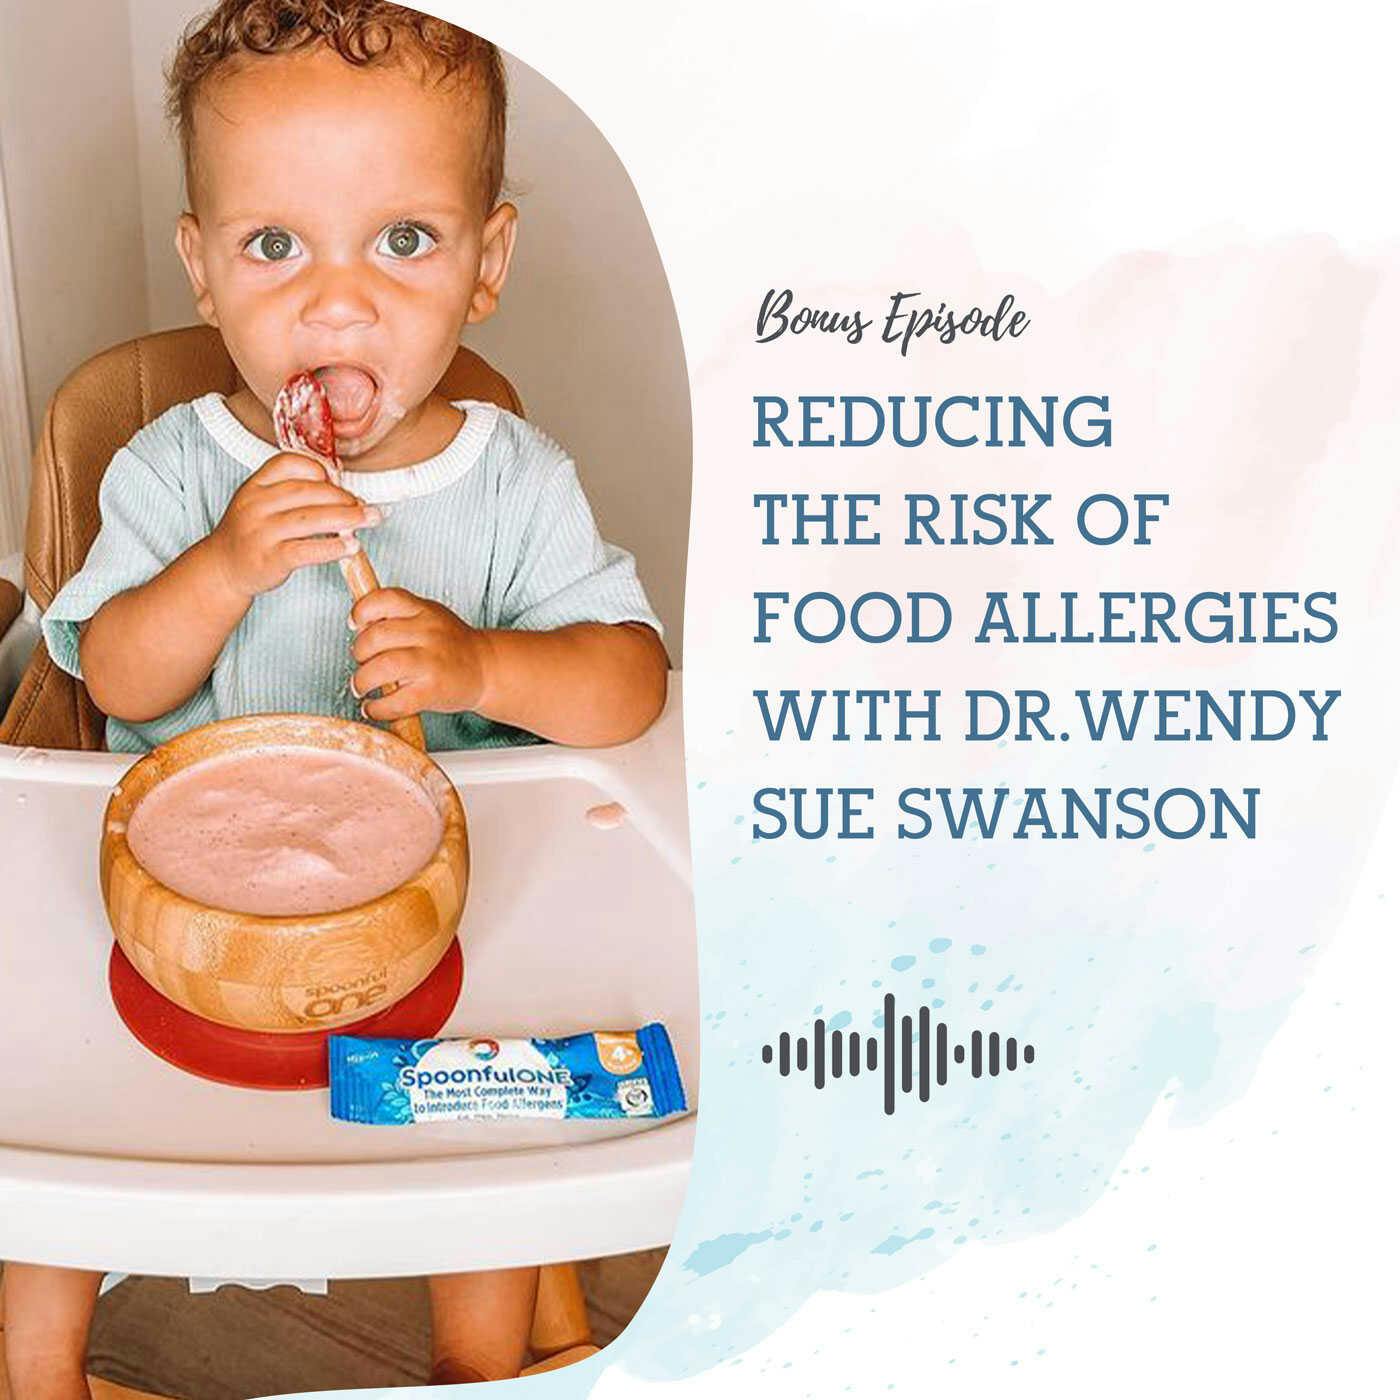 S2 EP20:  BONUS EPISODE - REDUCING THE RISK OF FOOD ALLERGIES WITH DR. WENDY SUE SWANSON